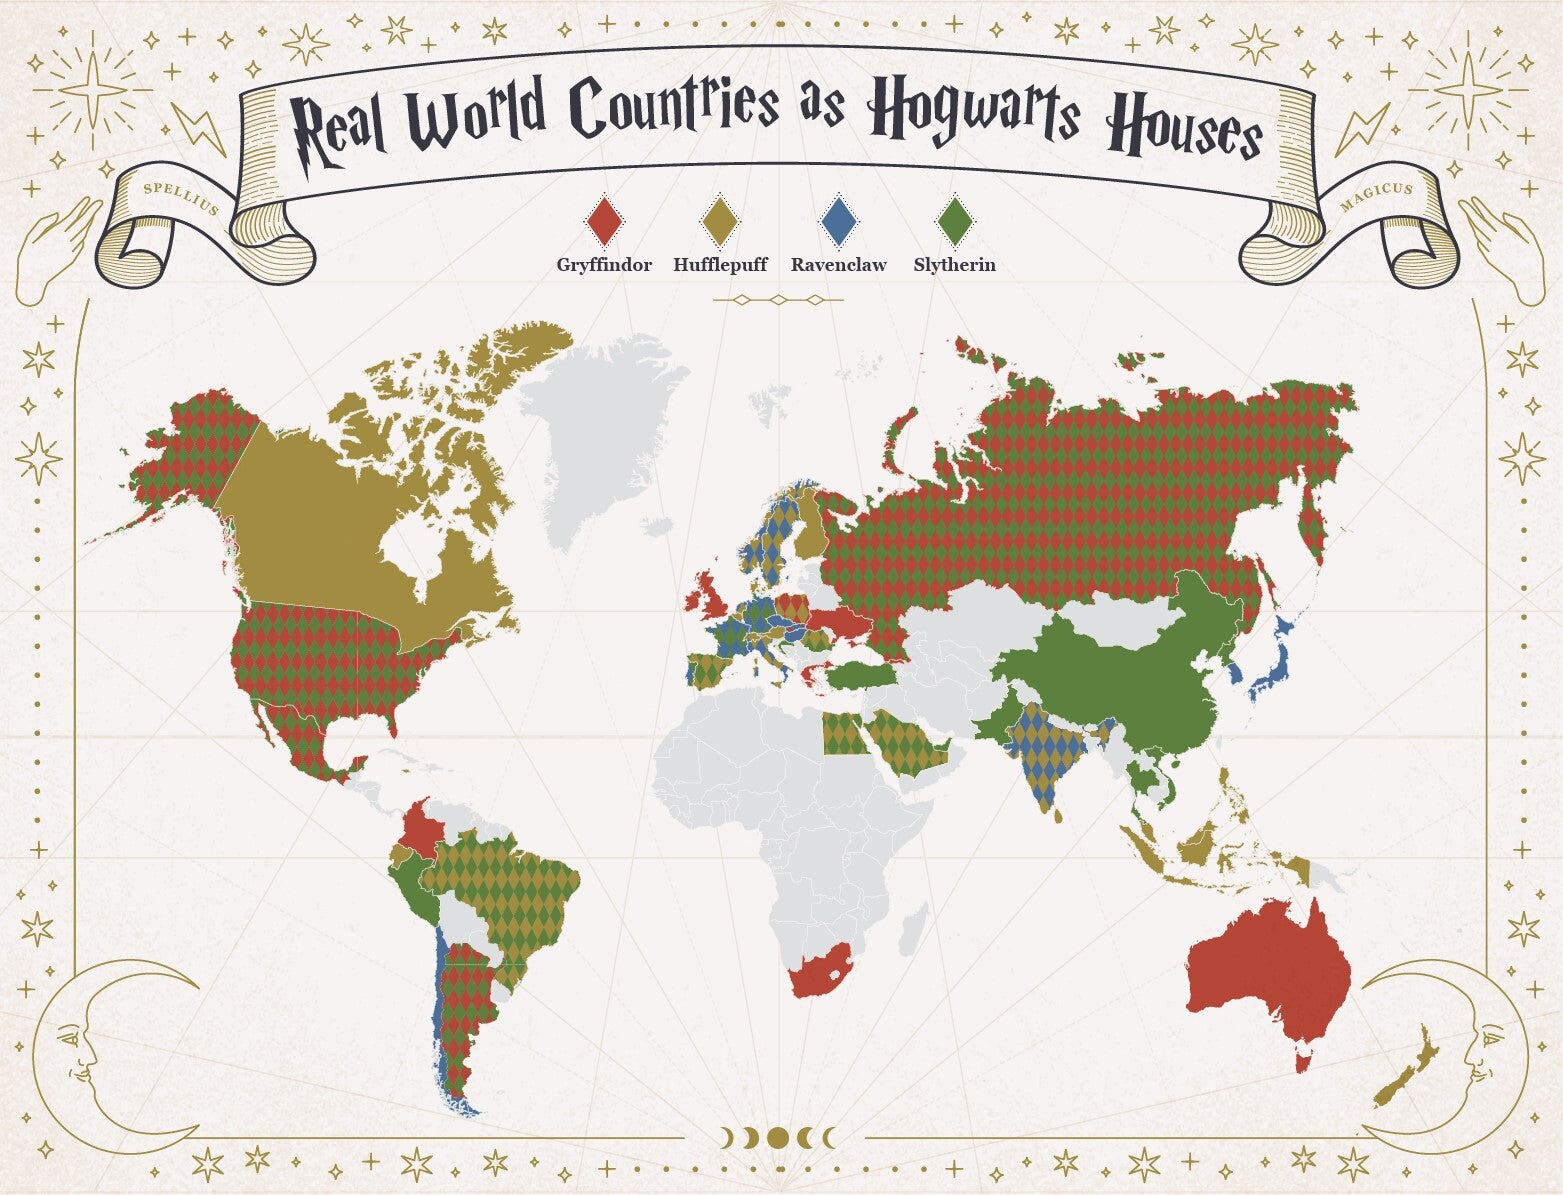 infographic of uk countries as hogwarts houses from harry potter